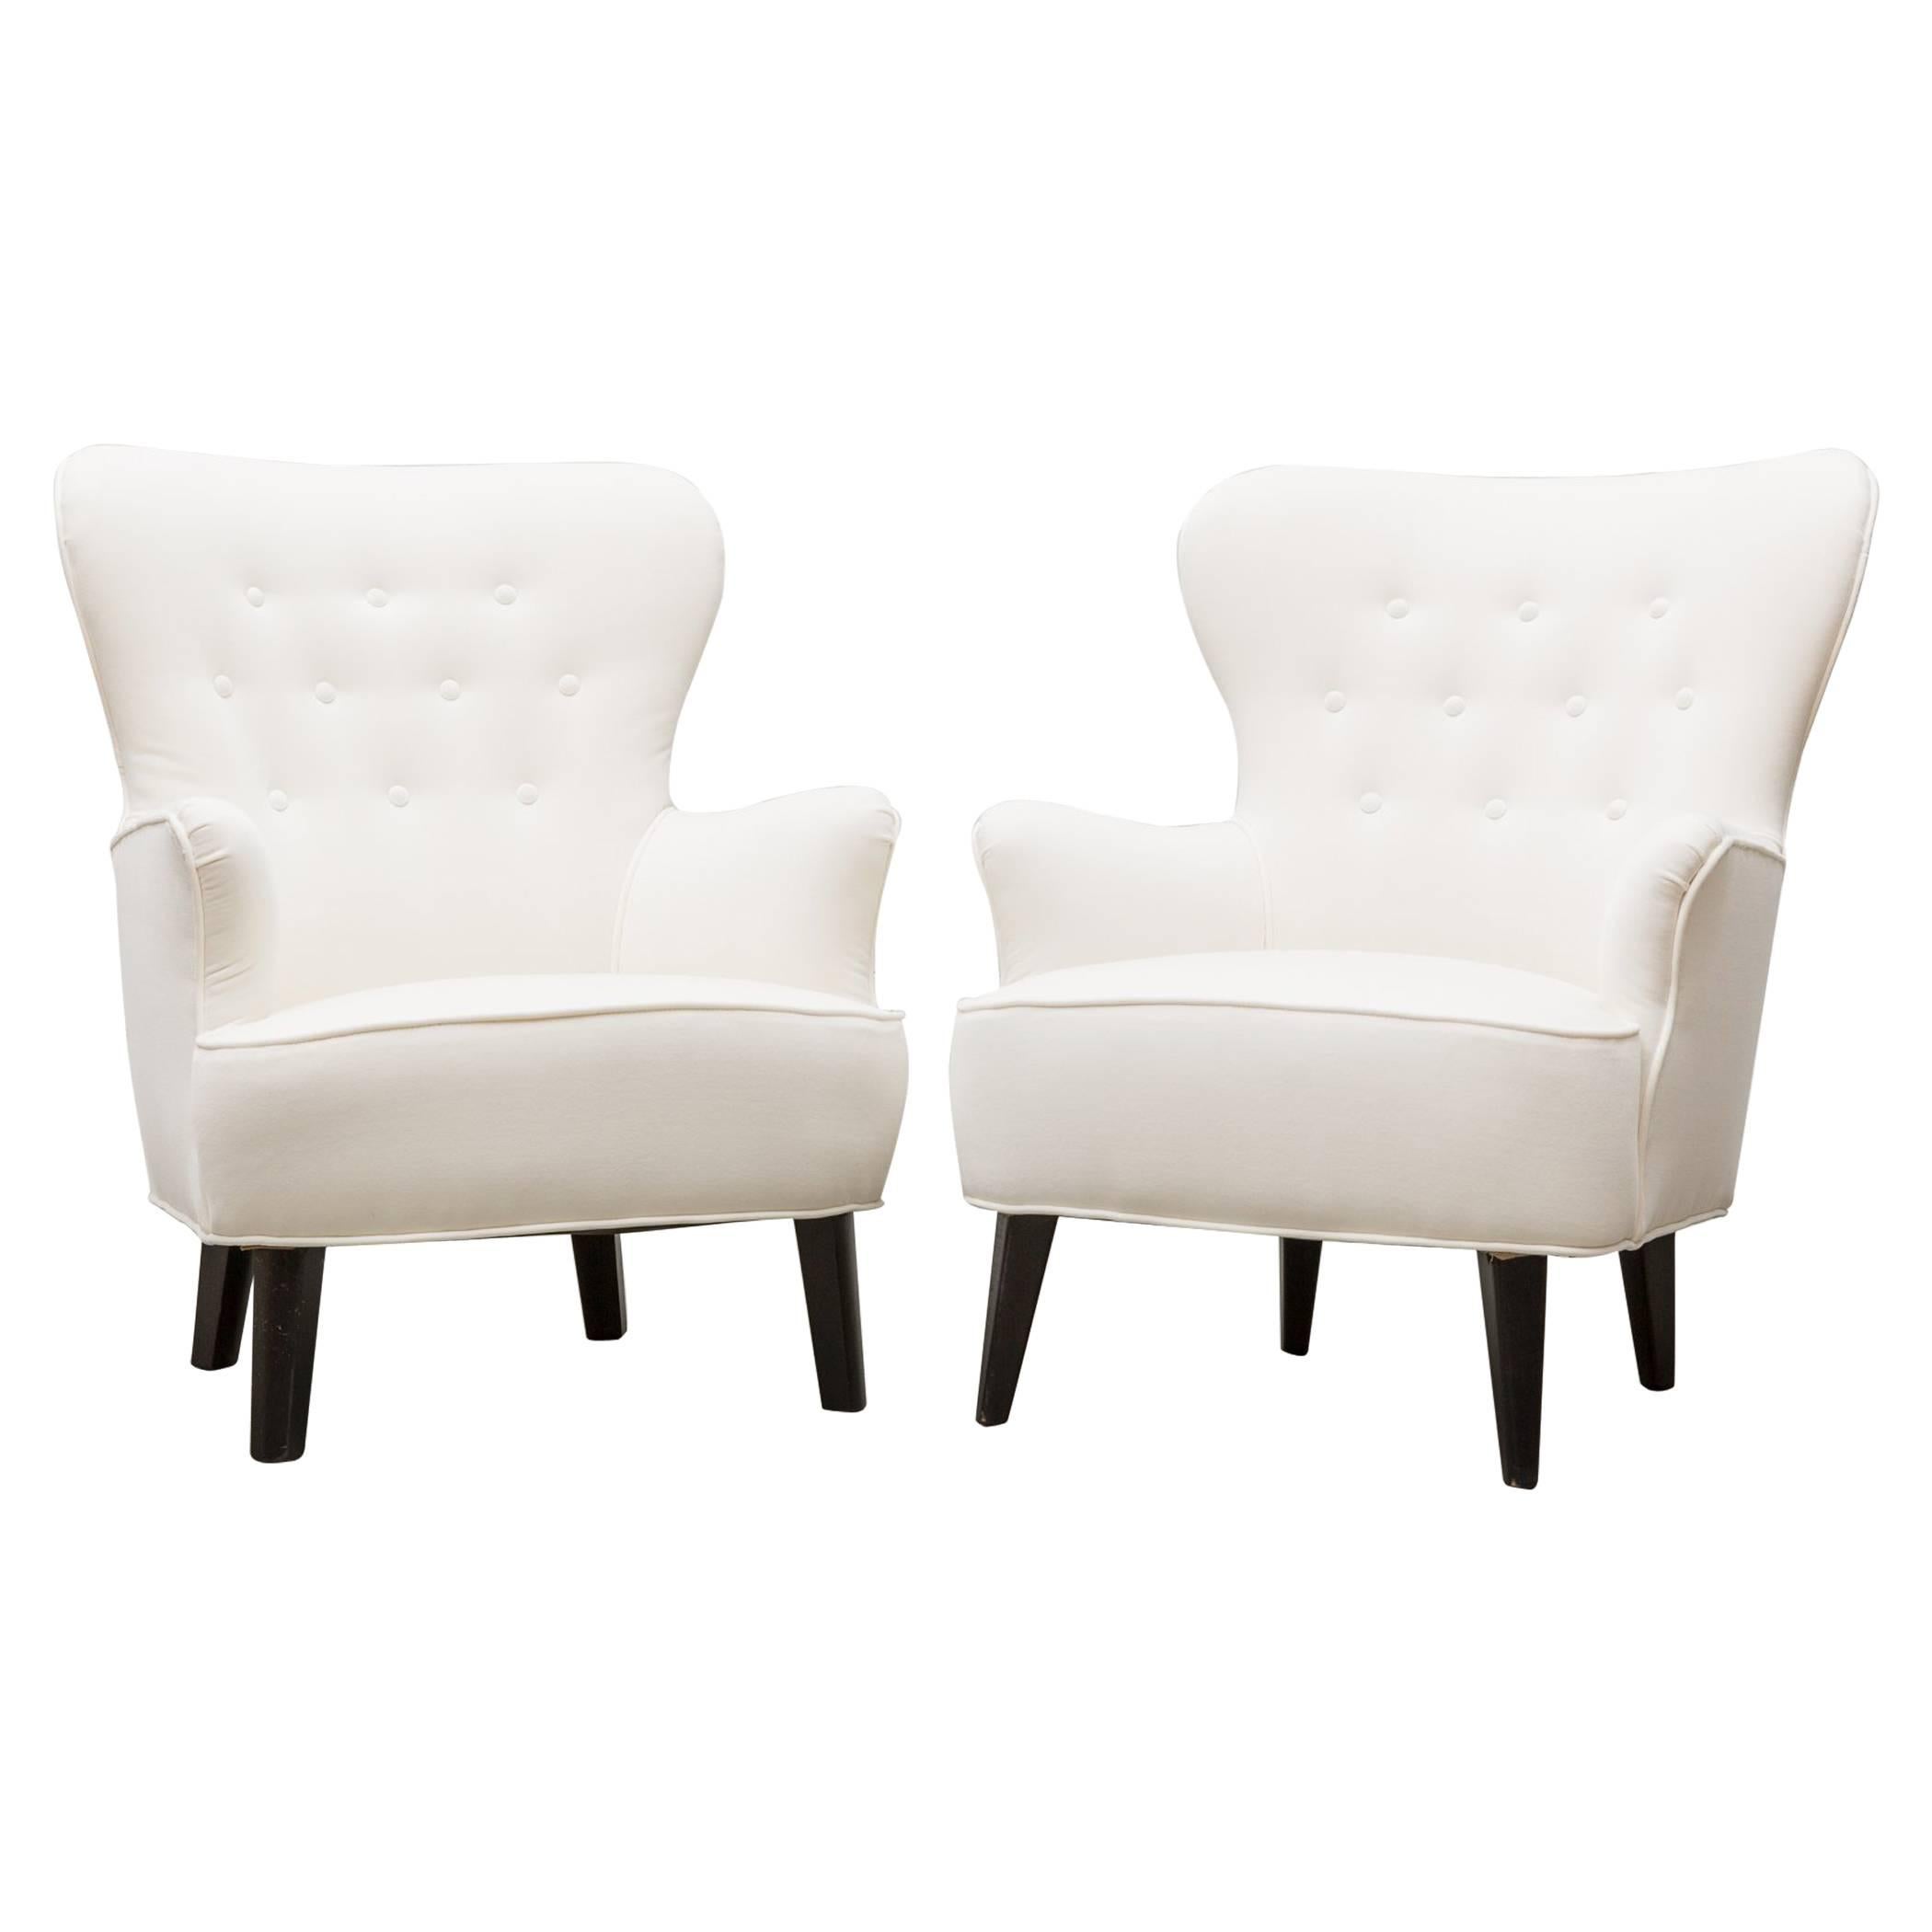 Gorgeous Pair of White Velvet Theo Ruth Lounge Chairs by Artifort